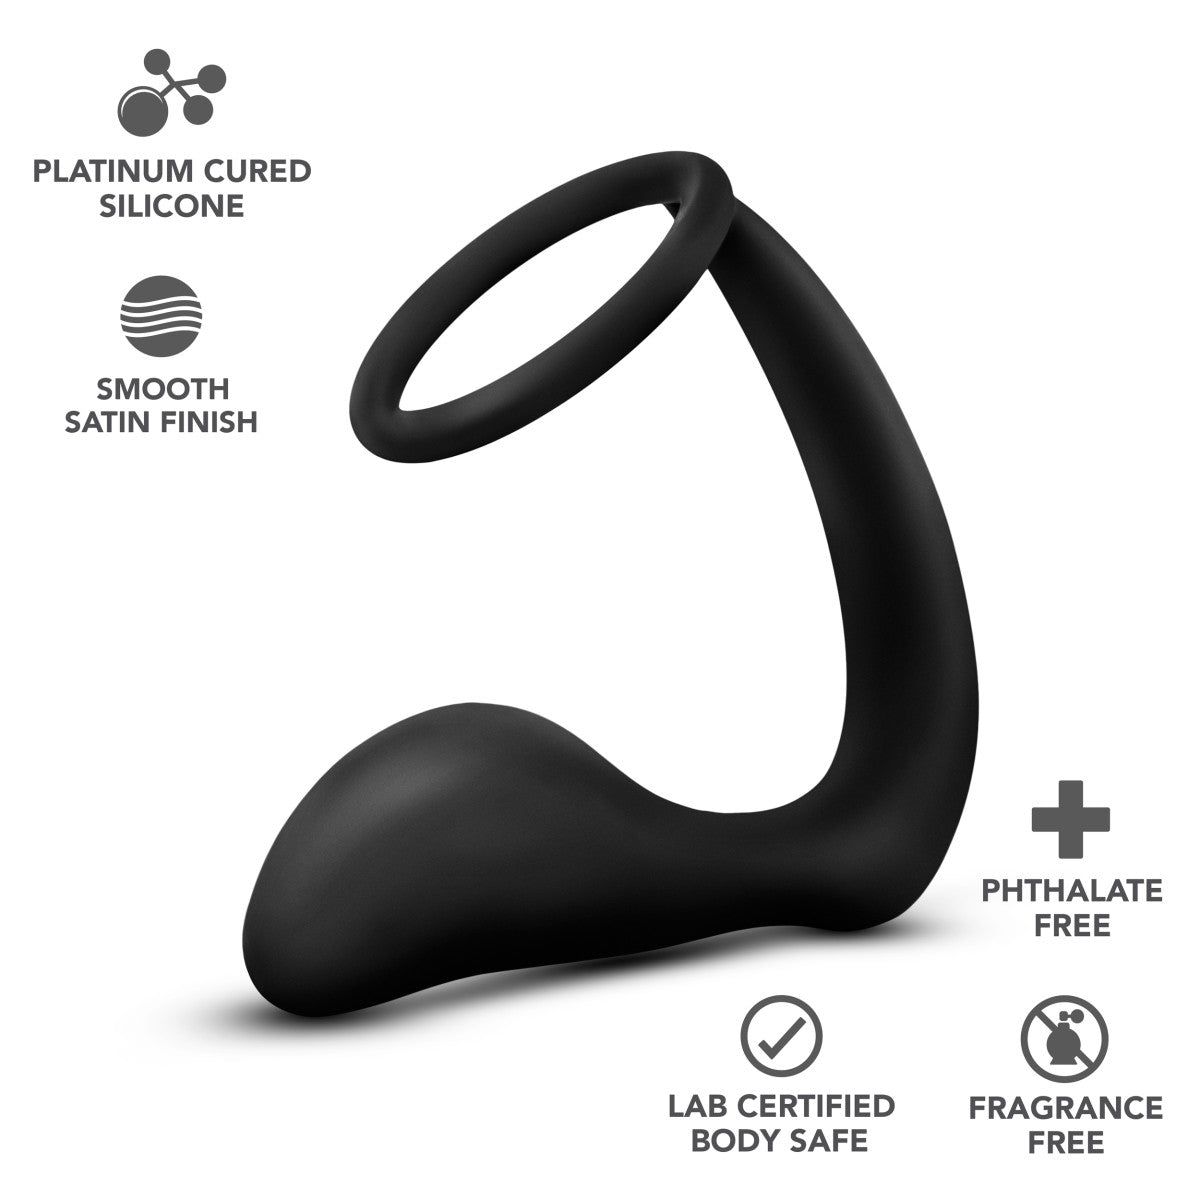 
Black cock ring and plug in one. Thin O ring is connected to a plug with a tapered bulbous tip for prostate stimulation. Additional images show alternate angles and highlight features as listed in description and/or bullet points. Screen reader support enabled.
